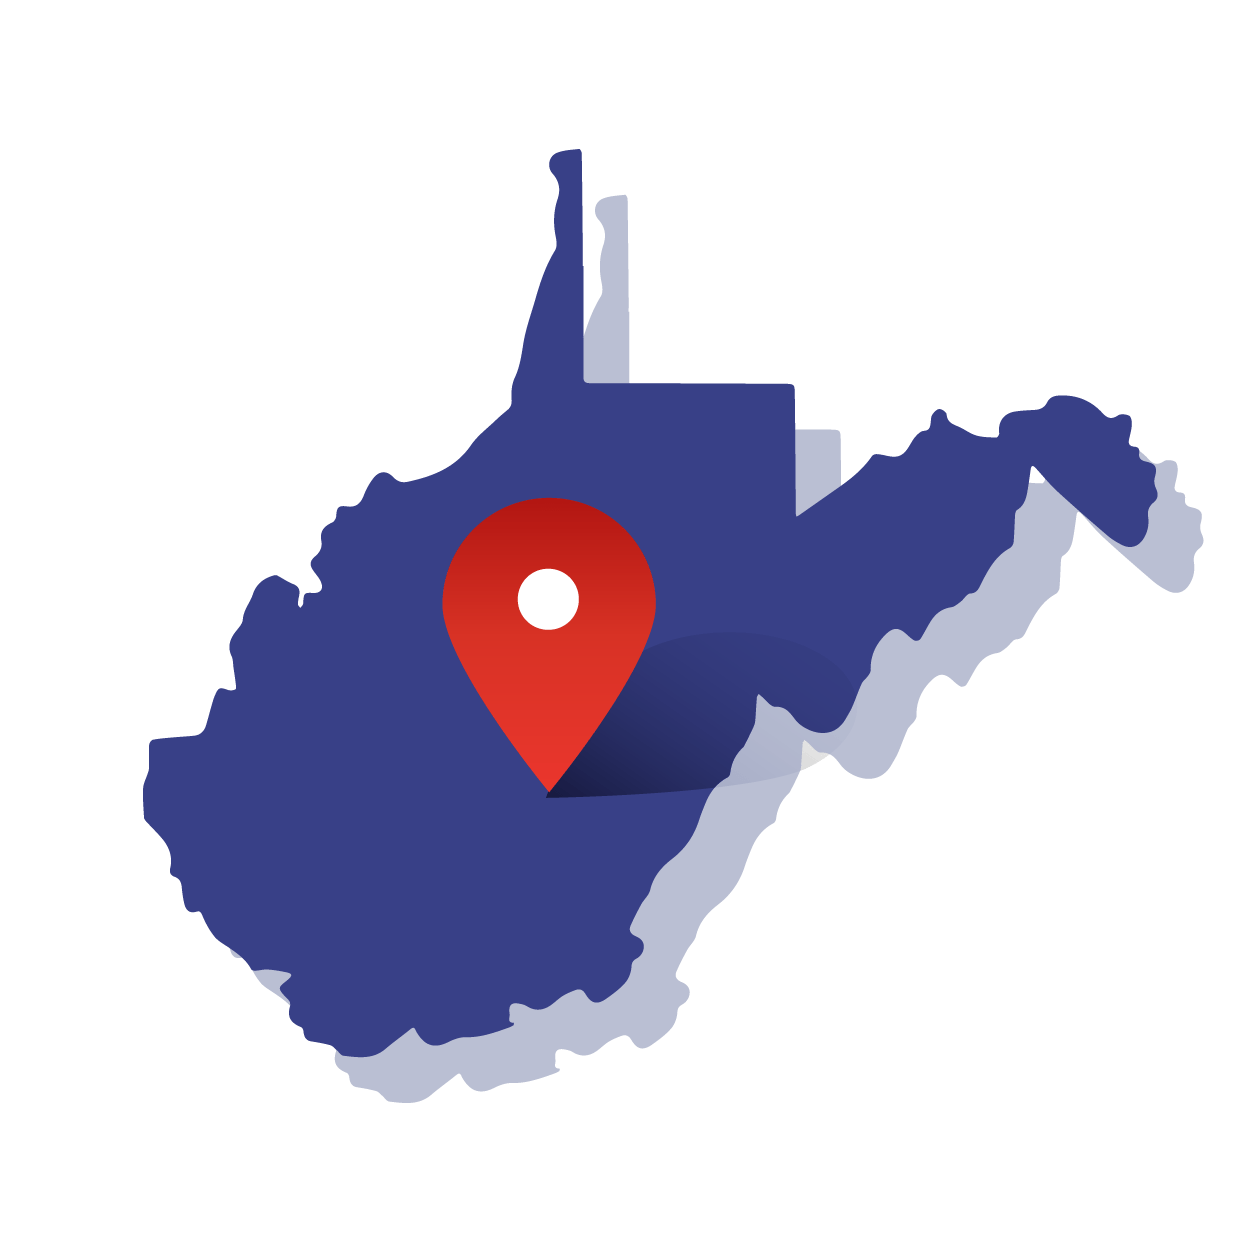 Map of West Virginia with its shape outlined, featuring a central map point and a circle representing a radius around that point for demographic analysis of zip codes.